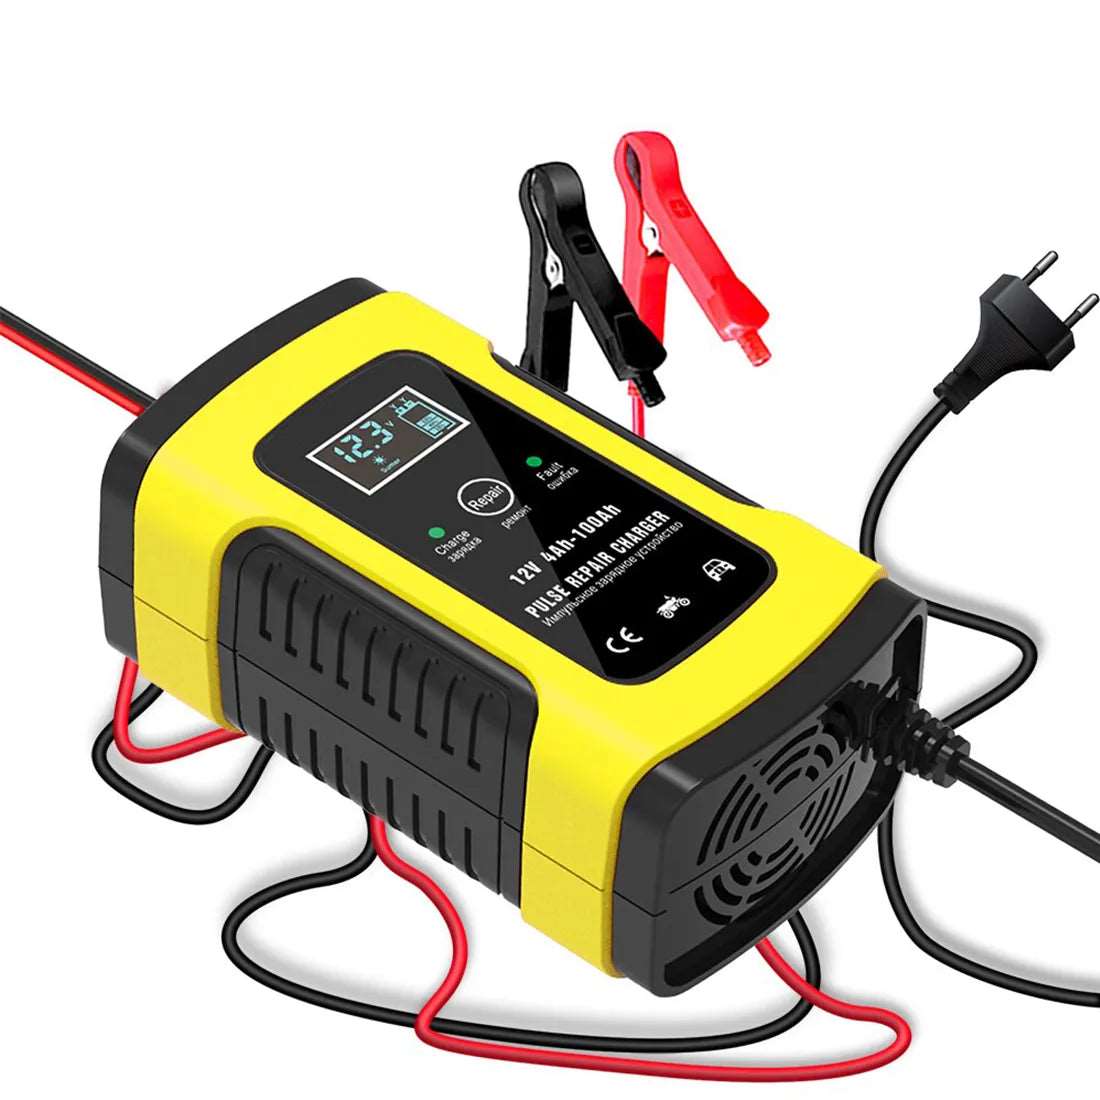 Muvit 12v Fully Automatic Car Battery Charger for Car, Bike